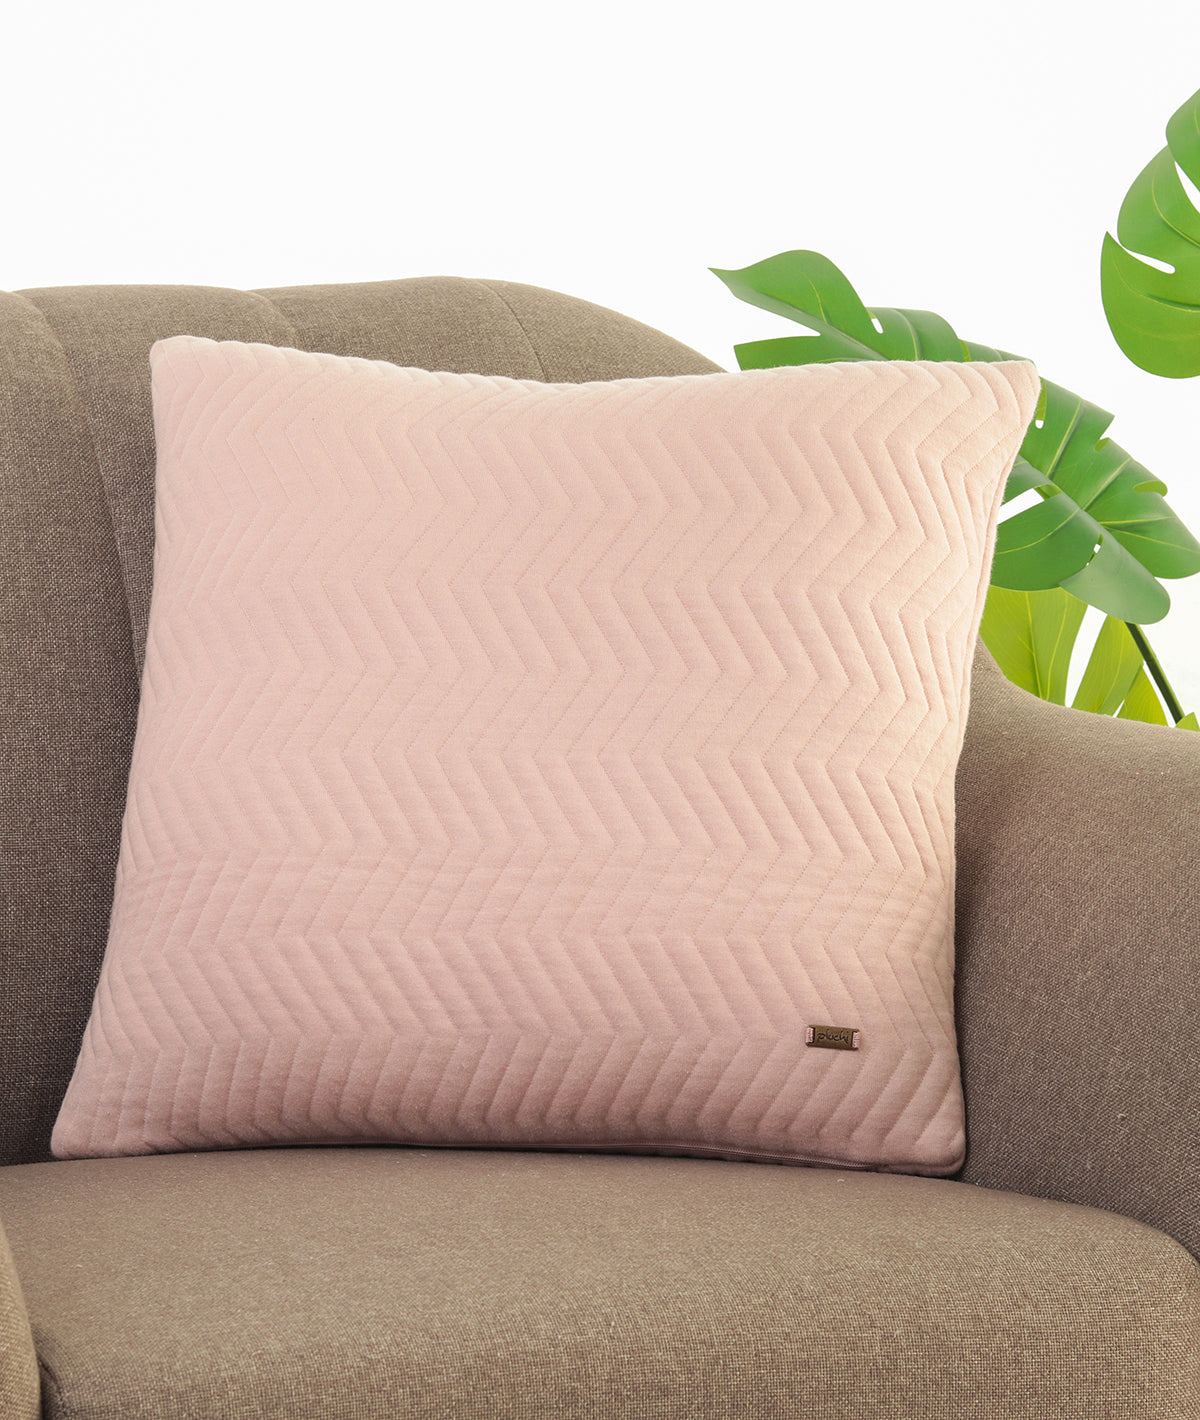 Zig Zag Cameo Pink & Natural Cotton Knitted Quilted Decorative 18 X 18 Inches Cushion Cover